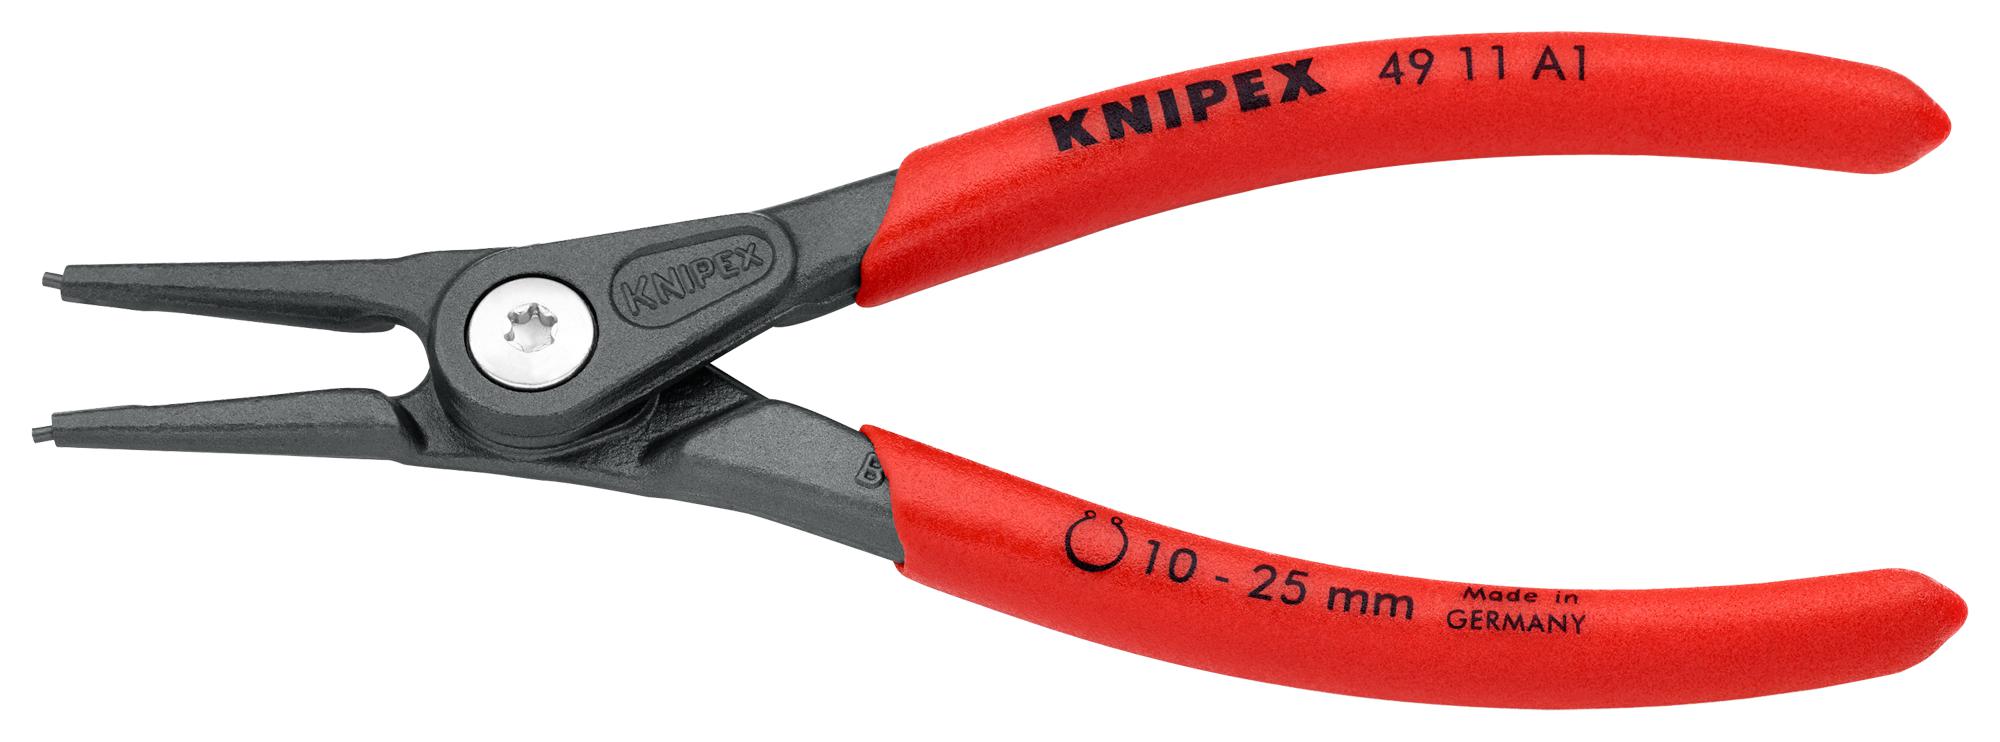 49 11 A1 CIRCLIP PLIER, EXT, STRAIGHT KNIPEX